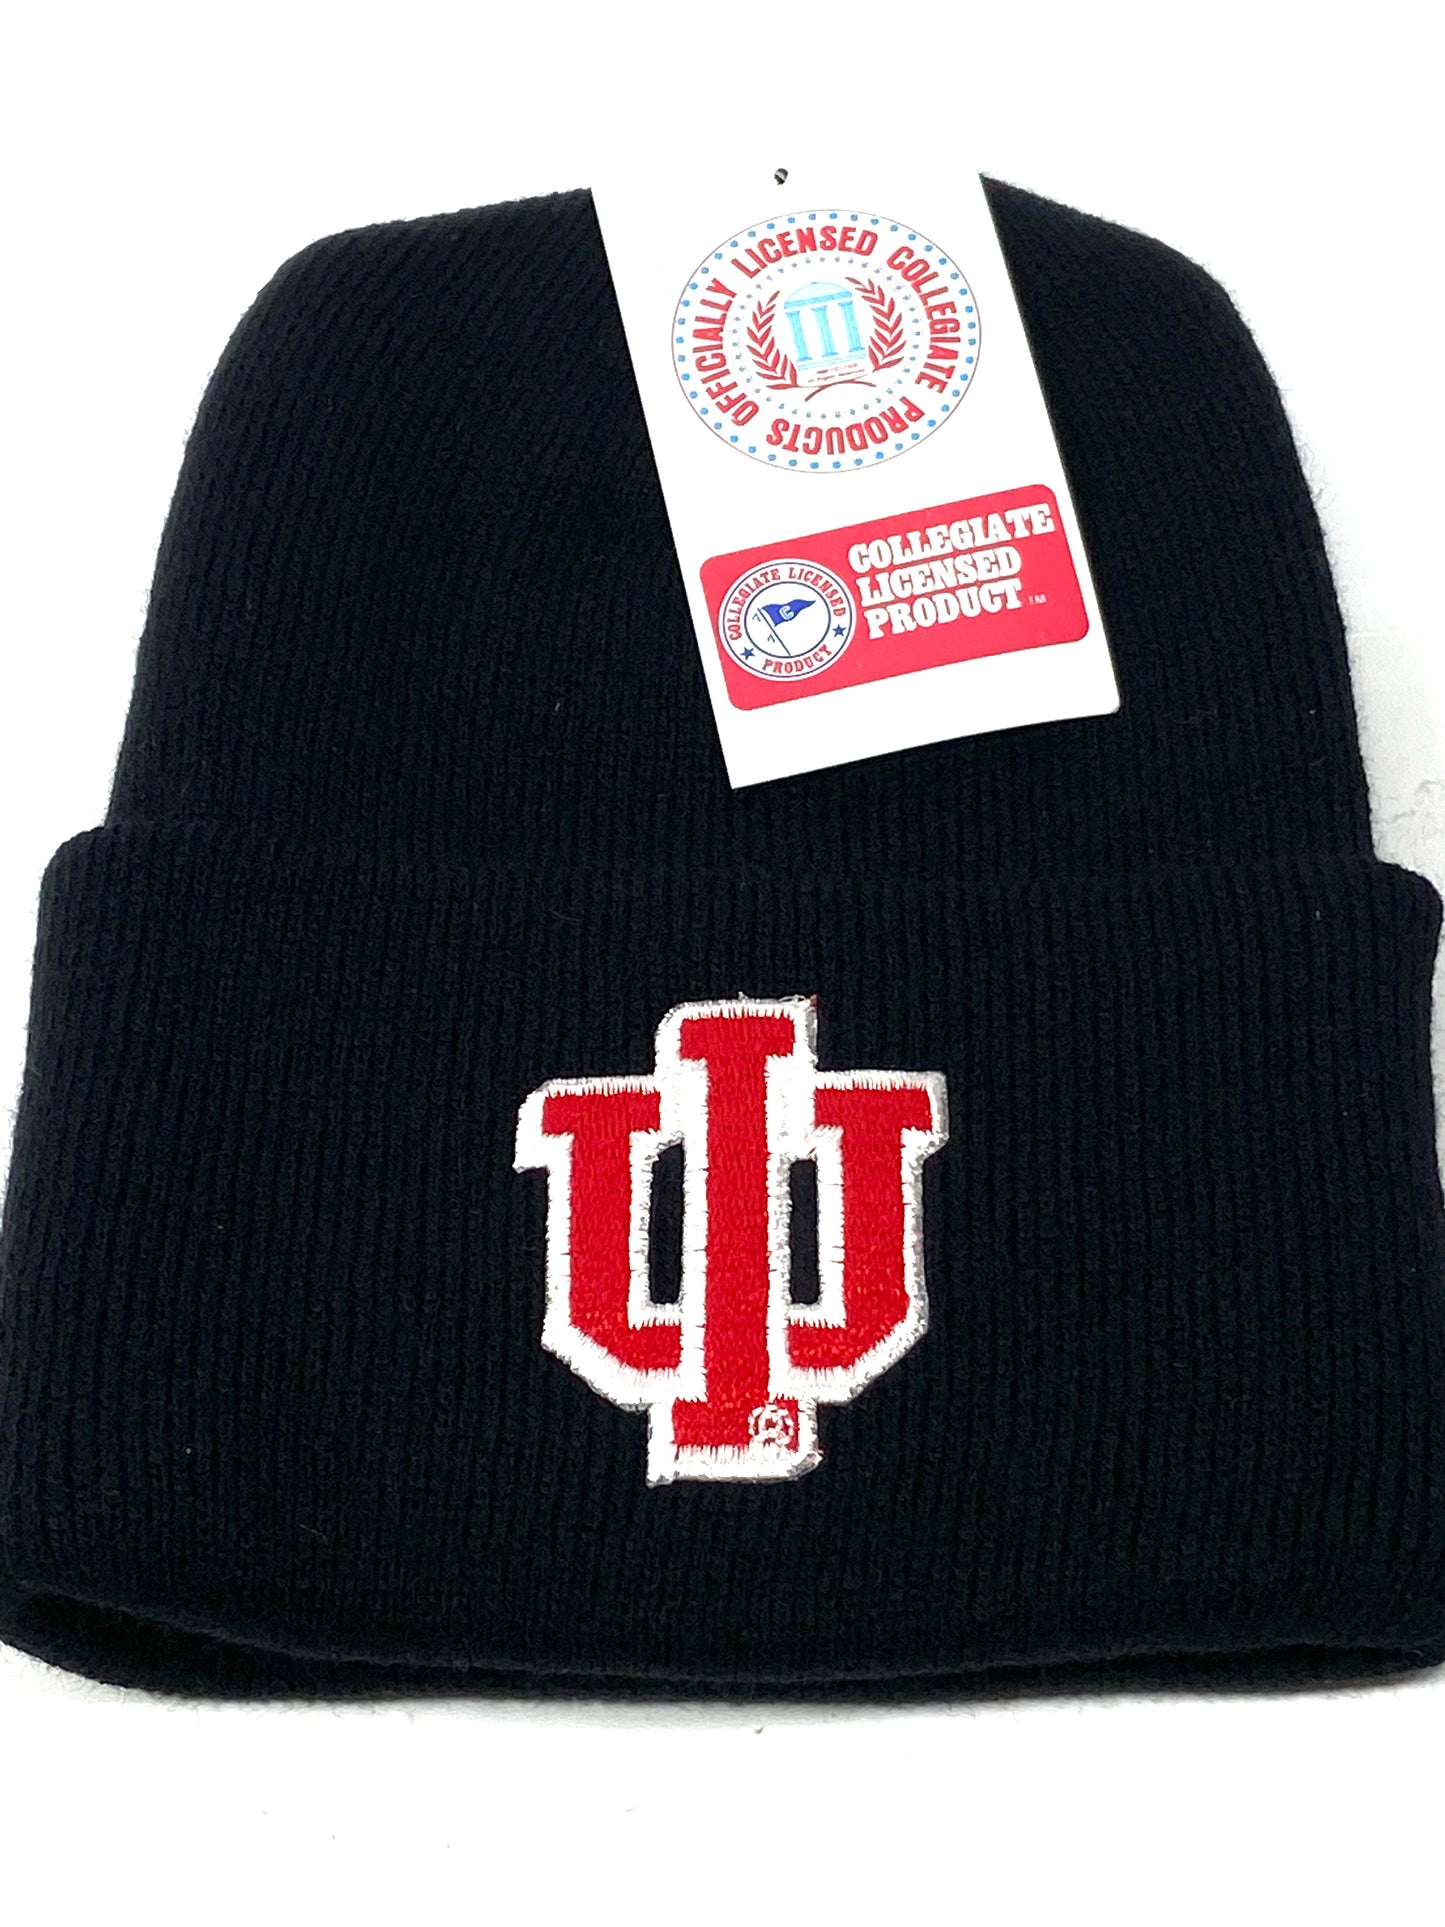 Indiana Hoosiers Vintage NCAA Embroidered NOS Black Knit Hat by Rossmor Ind.